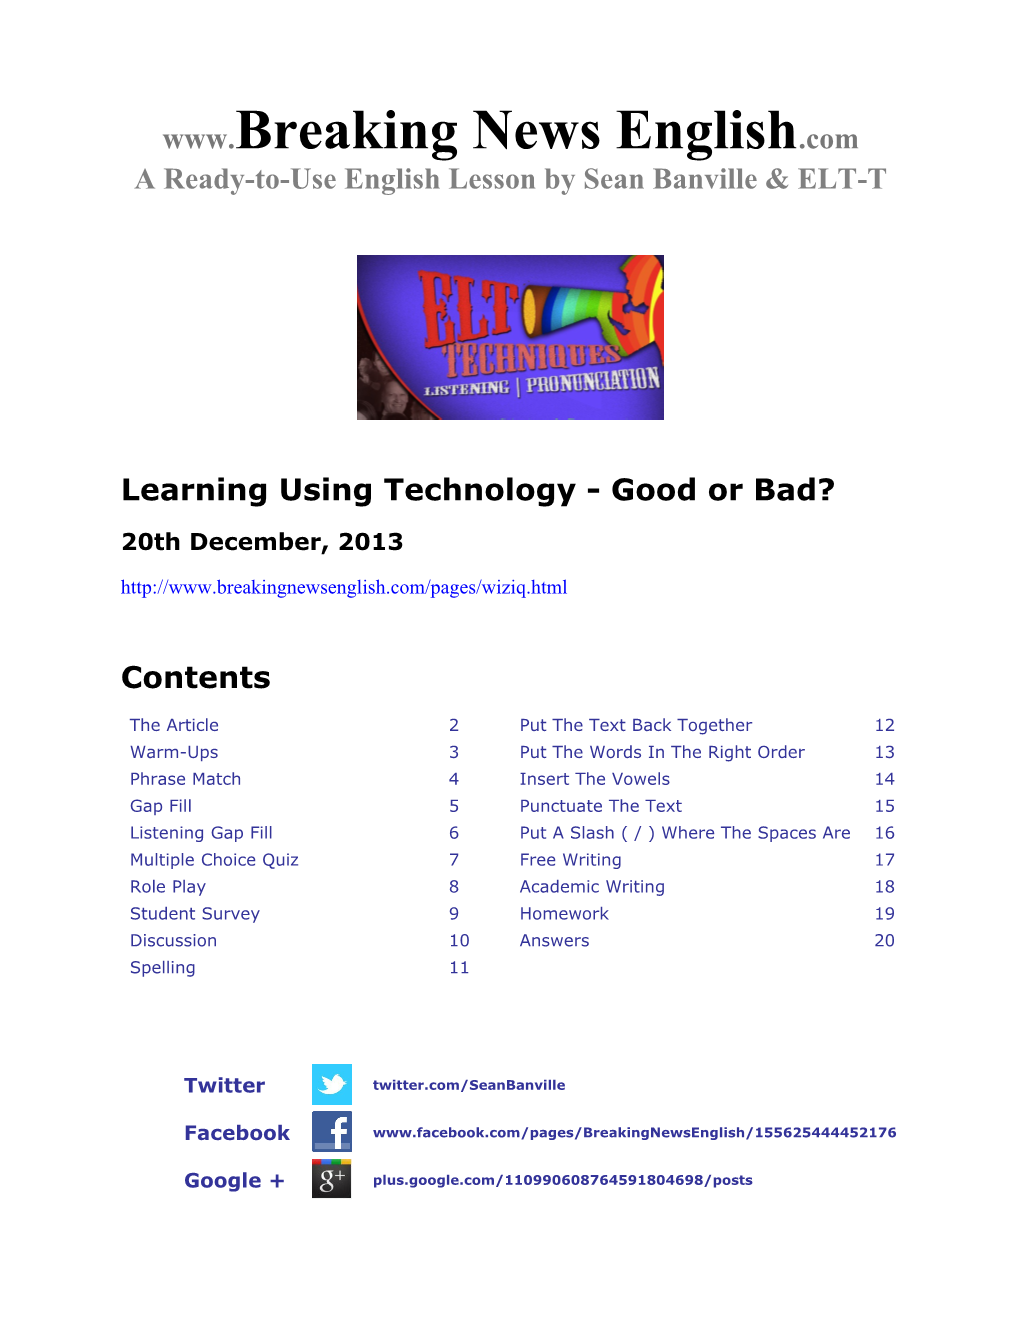 ESL Lesson: Learning Using Technology